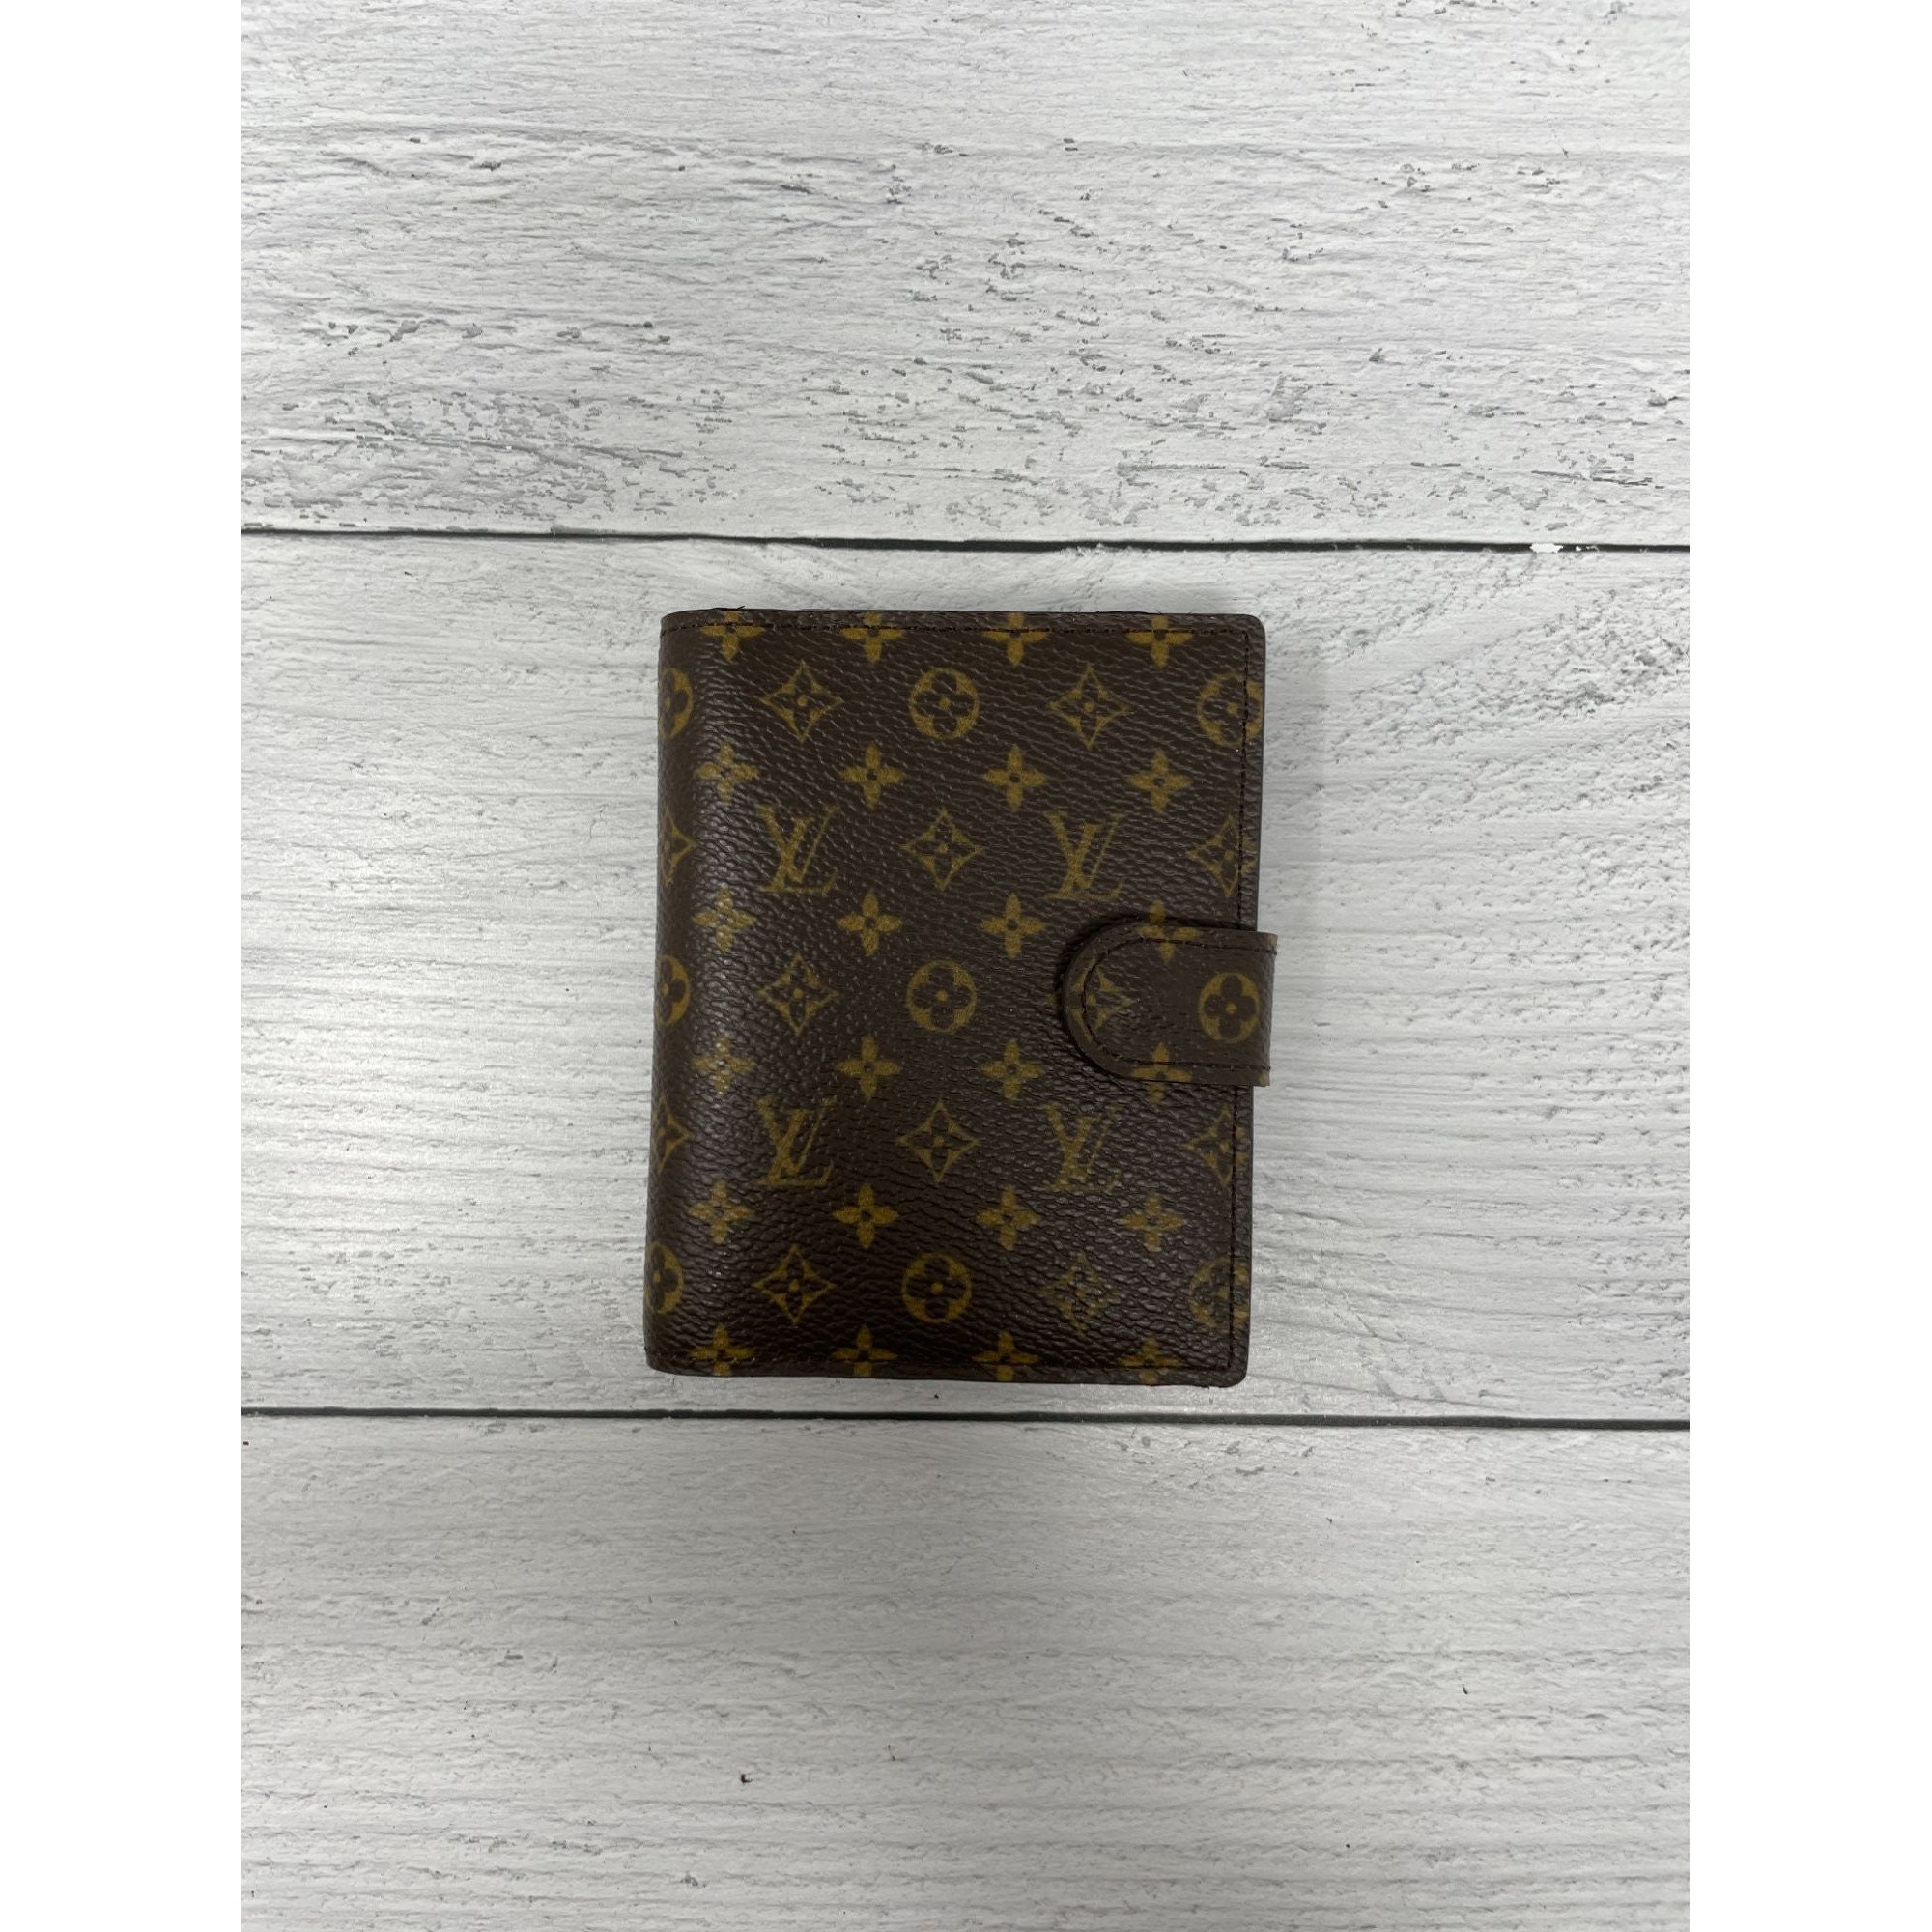 Pen fits Louis Vuitton Small PM Agenda+ 100 sheets of Refill